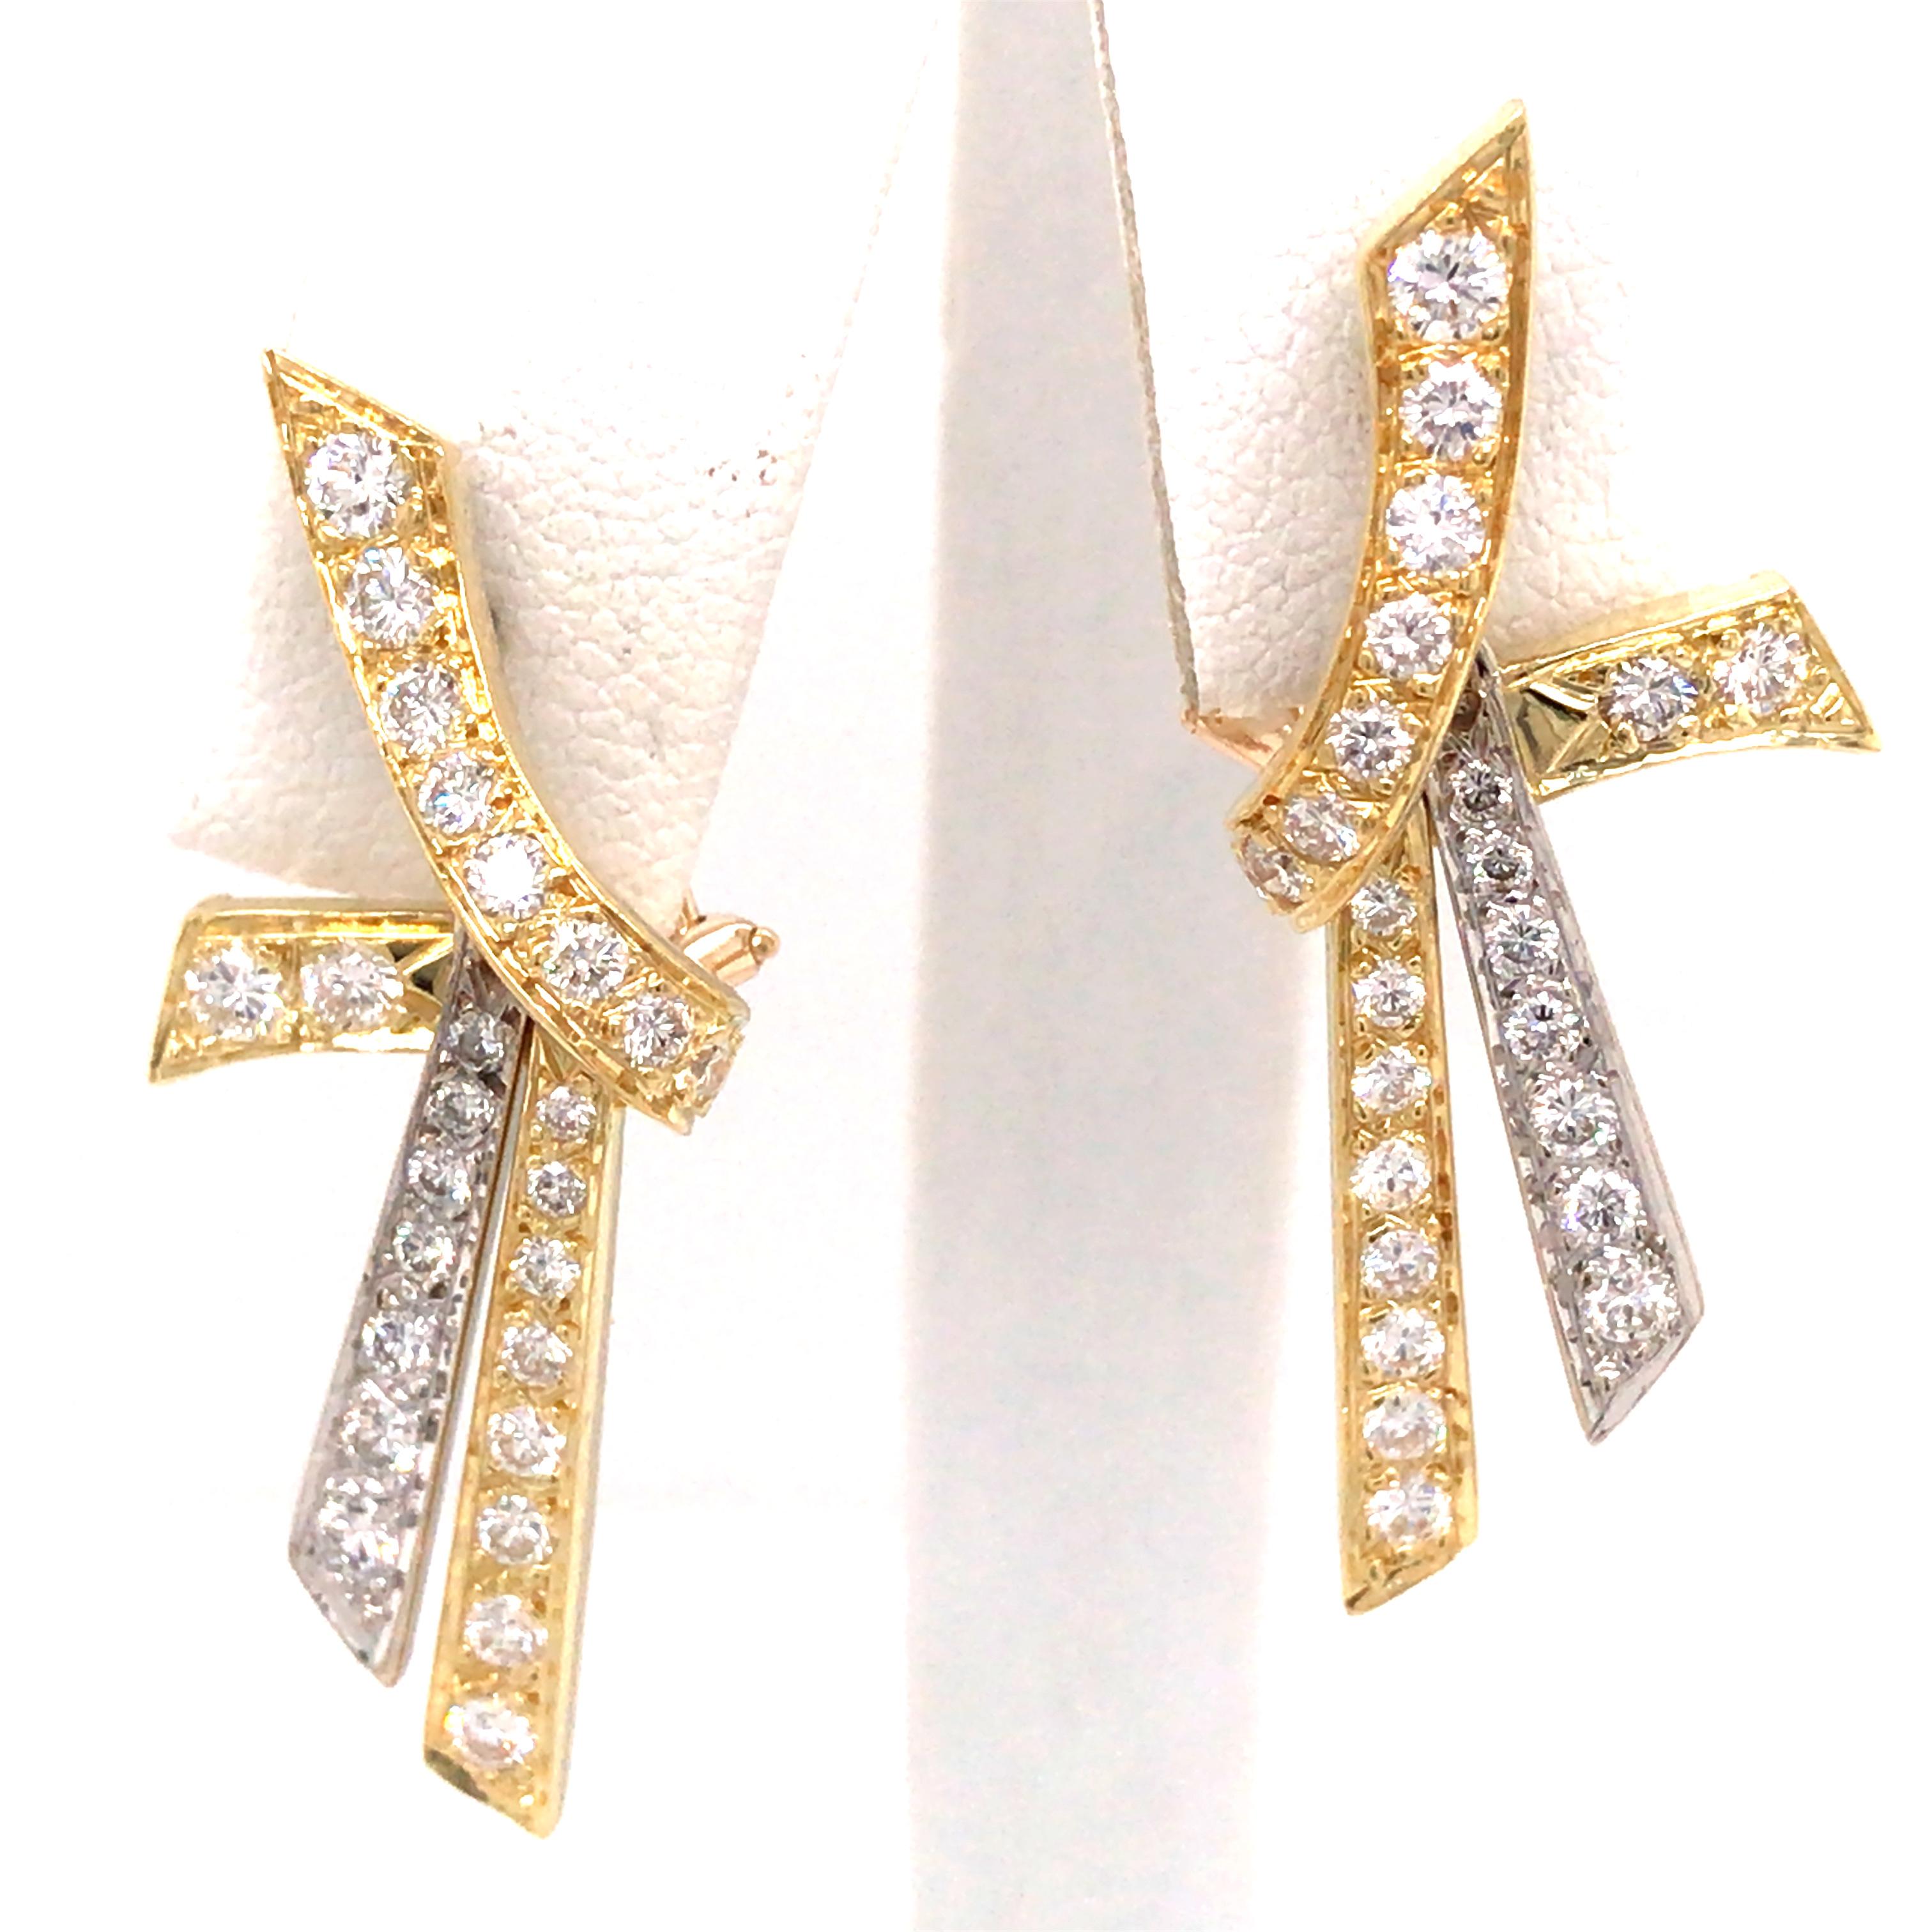 18K Two-Tone Gold Diamond Hanging Dangle Earrings.  Round Brilliant Cut Diamonds weighing 2.01 carat total weight G-H in color and VS in clarity are expertly set.  The Earrings measure 1 3/8 inch in length and 1/2 in width at the widest point. 